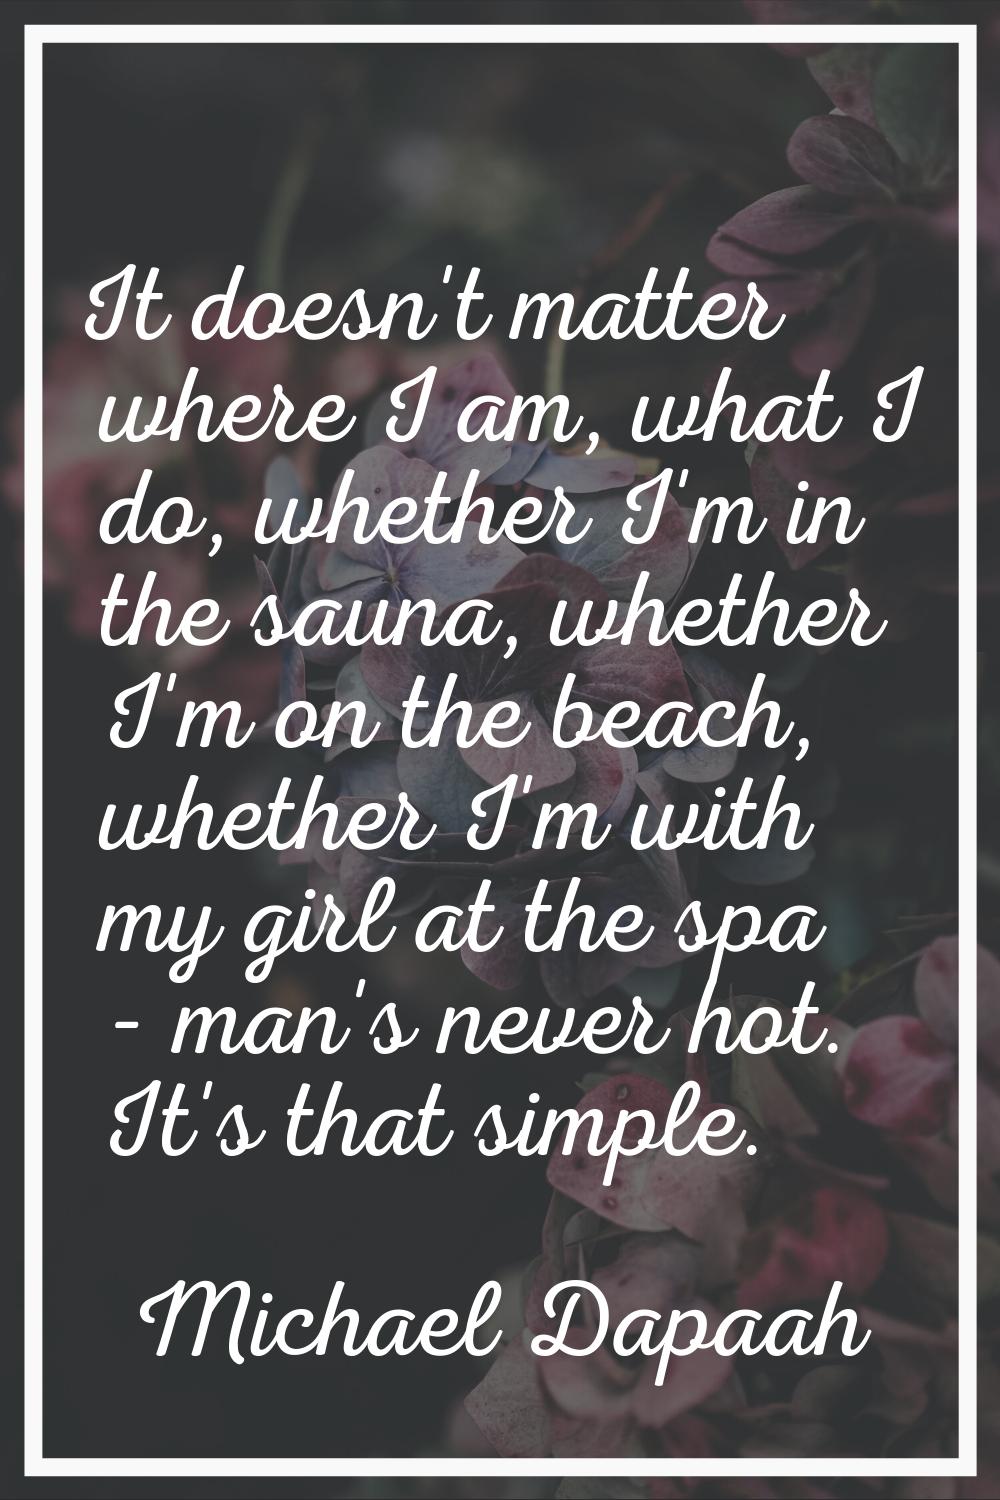 It doesn't matter where I am, what I do, whether I'm in the sauna, whether I'm on the beach, whethe